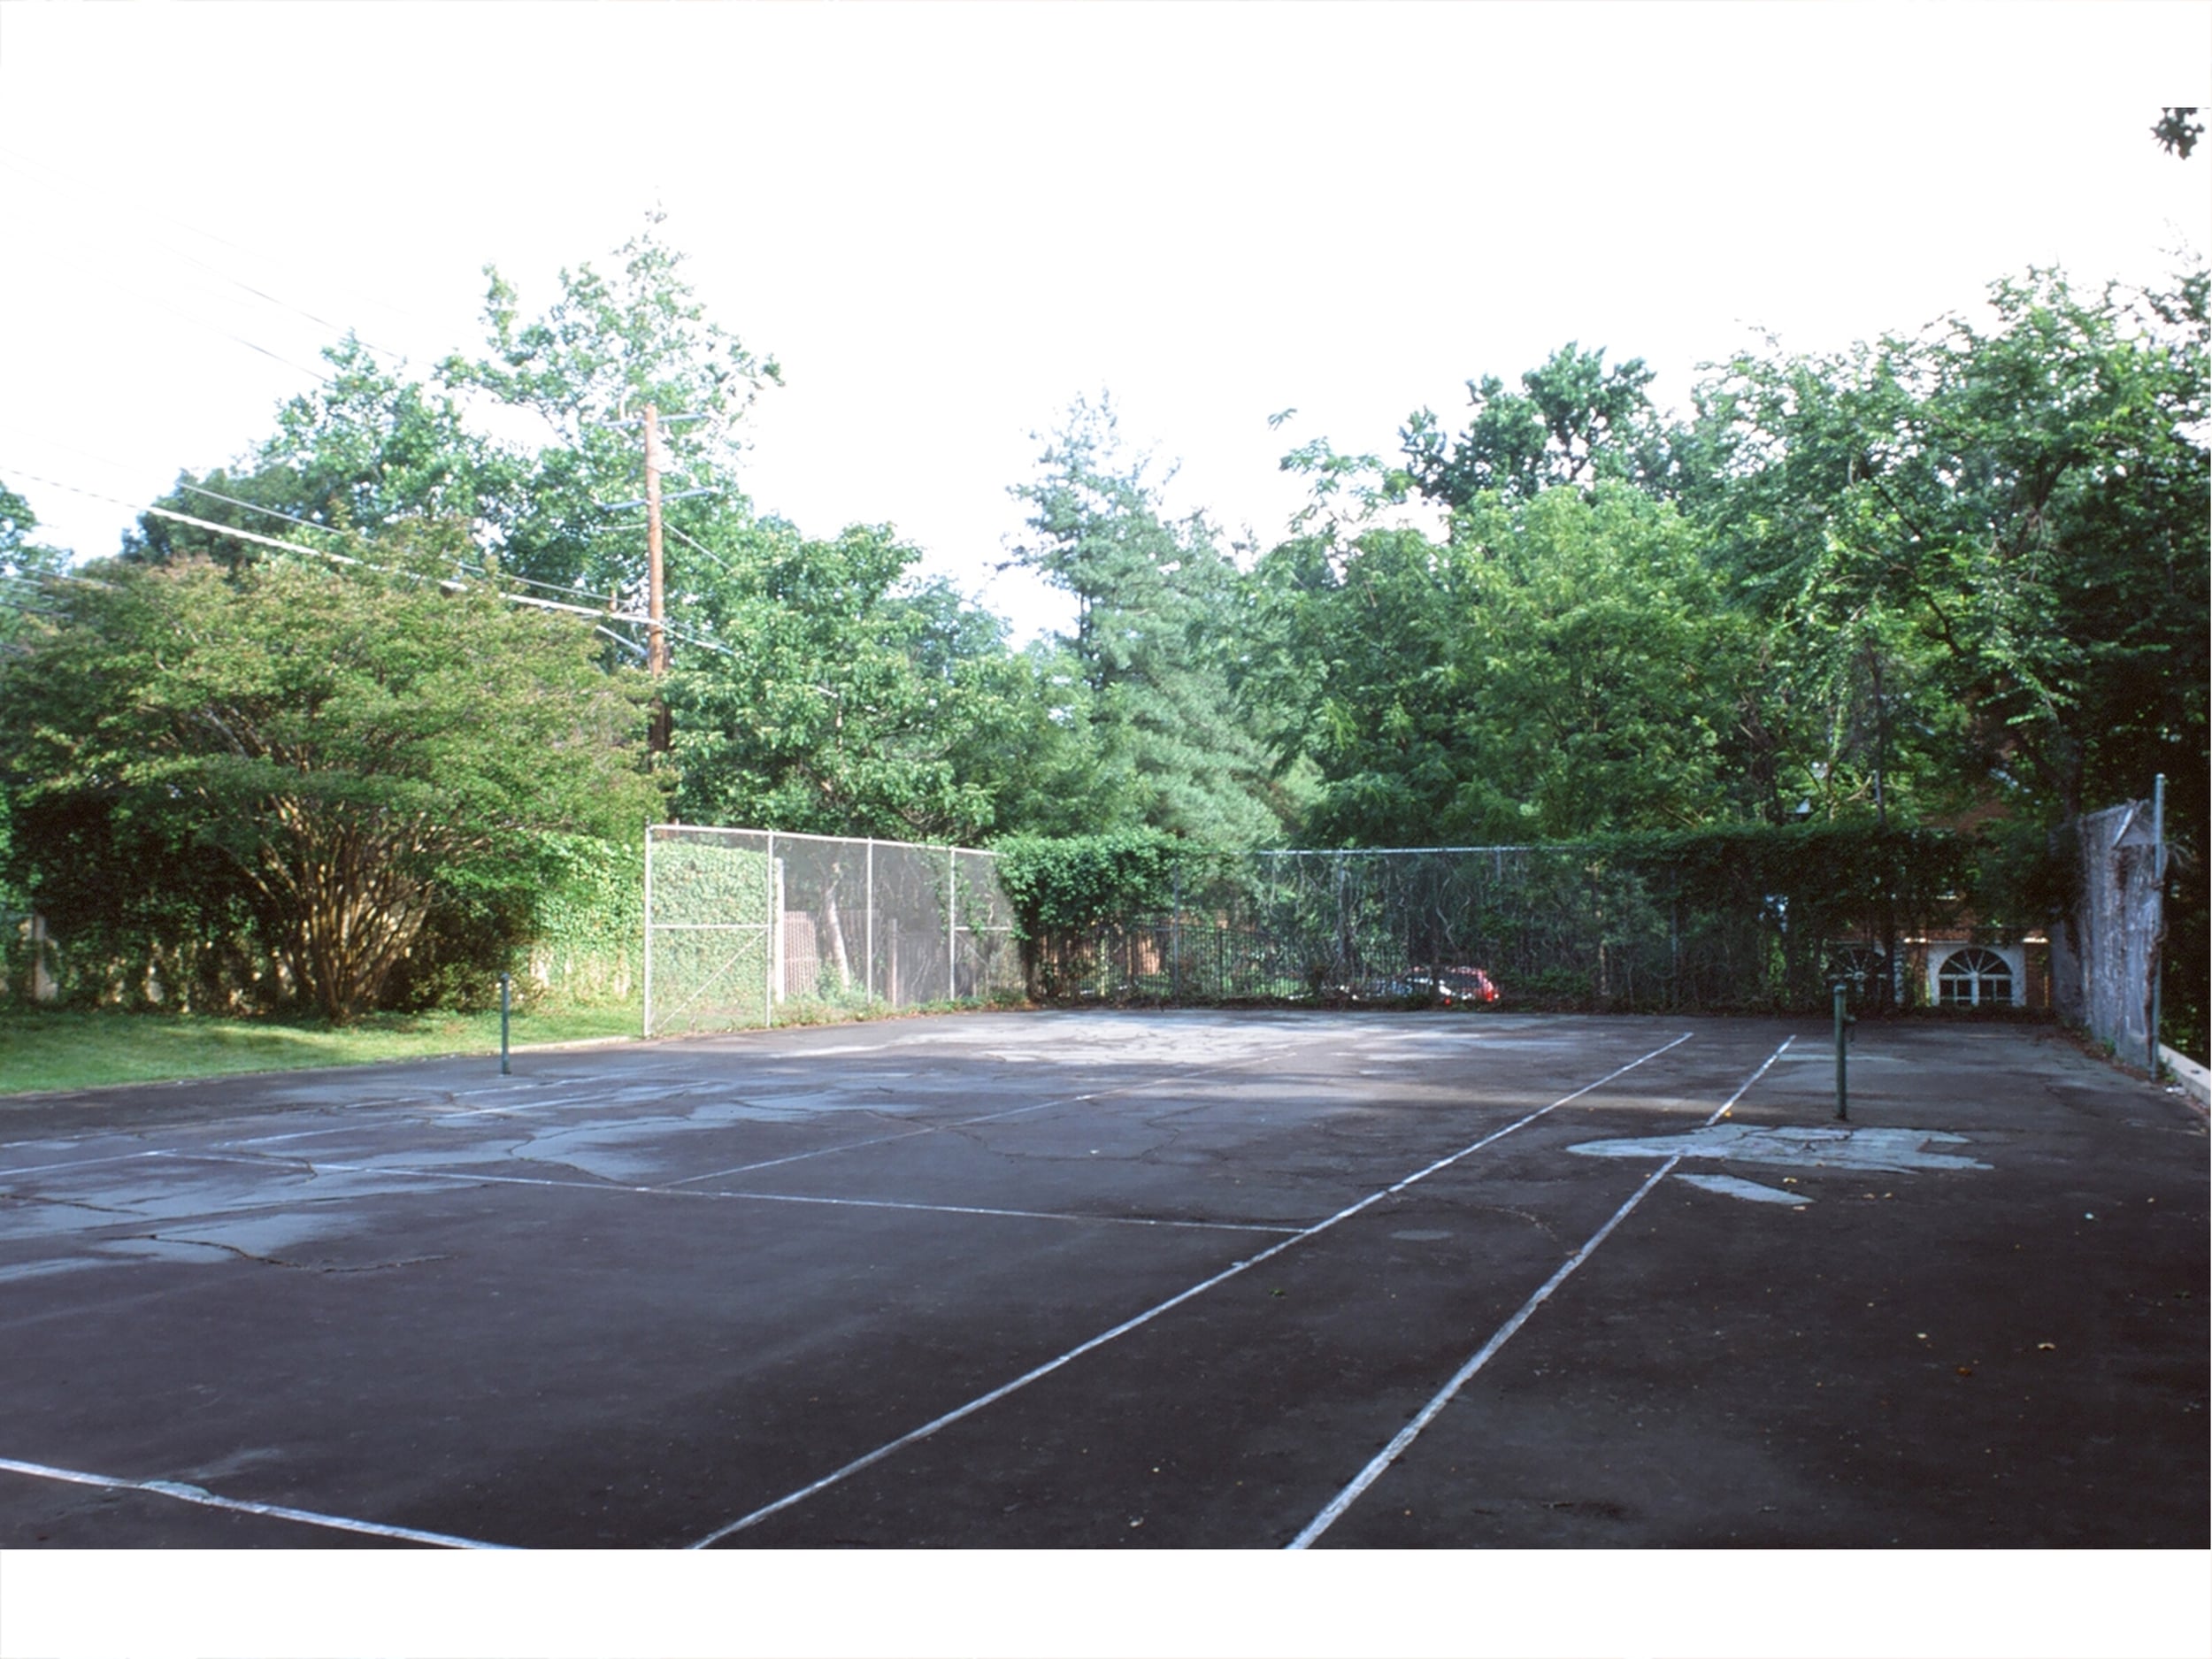 The unused and dilapidated tennis court